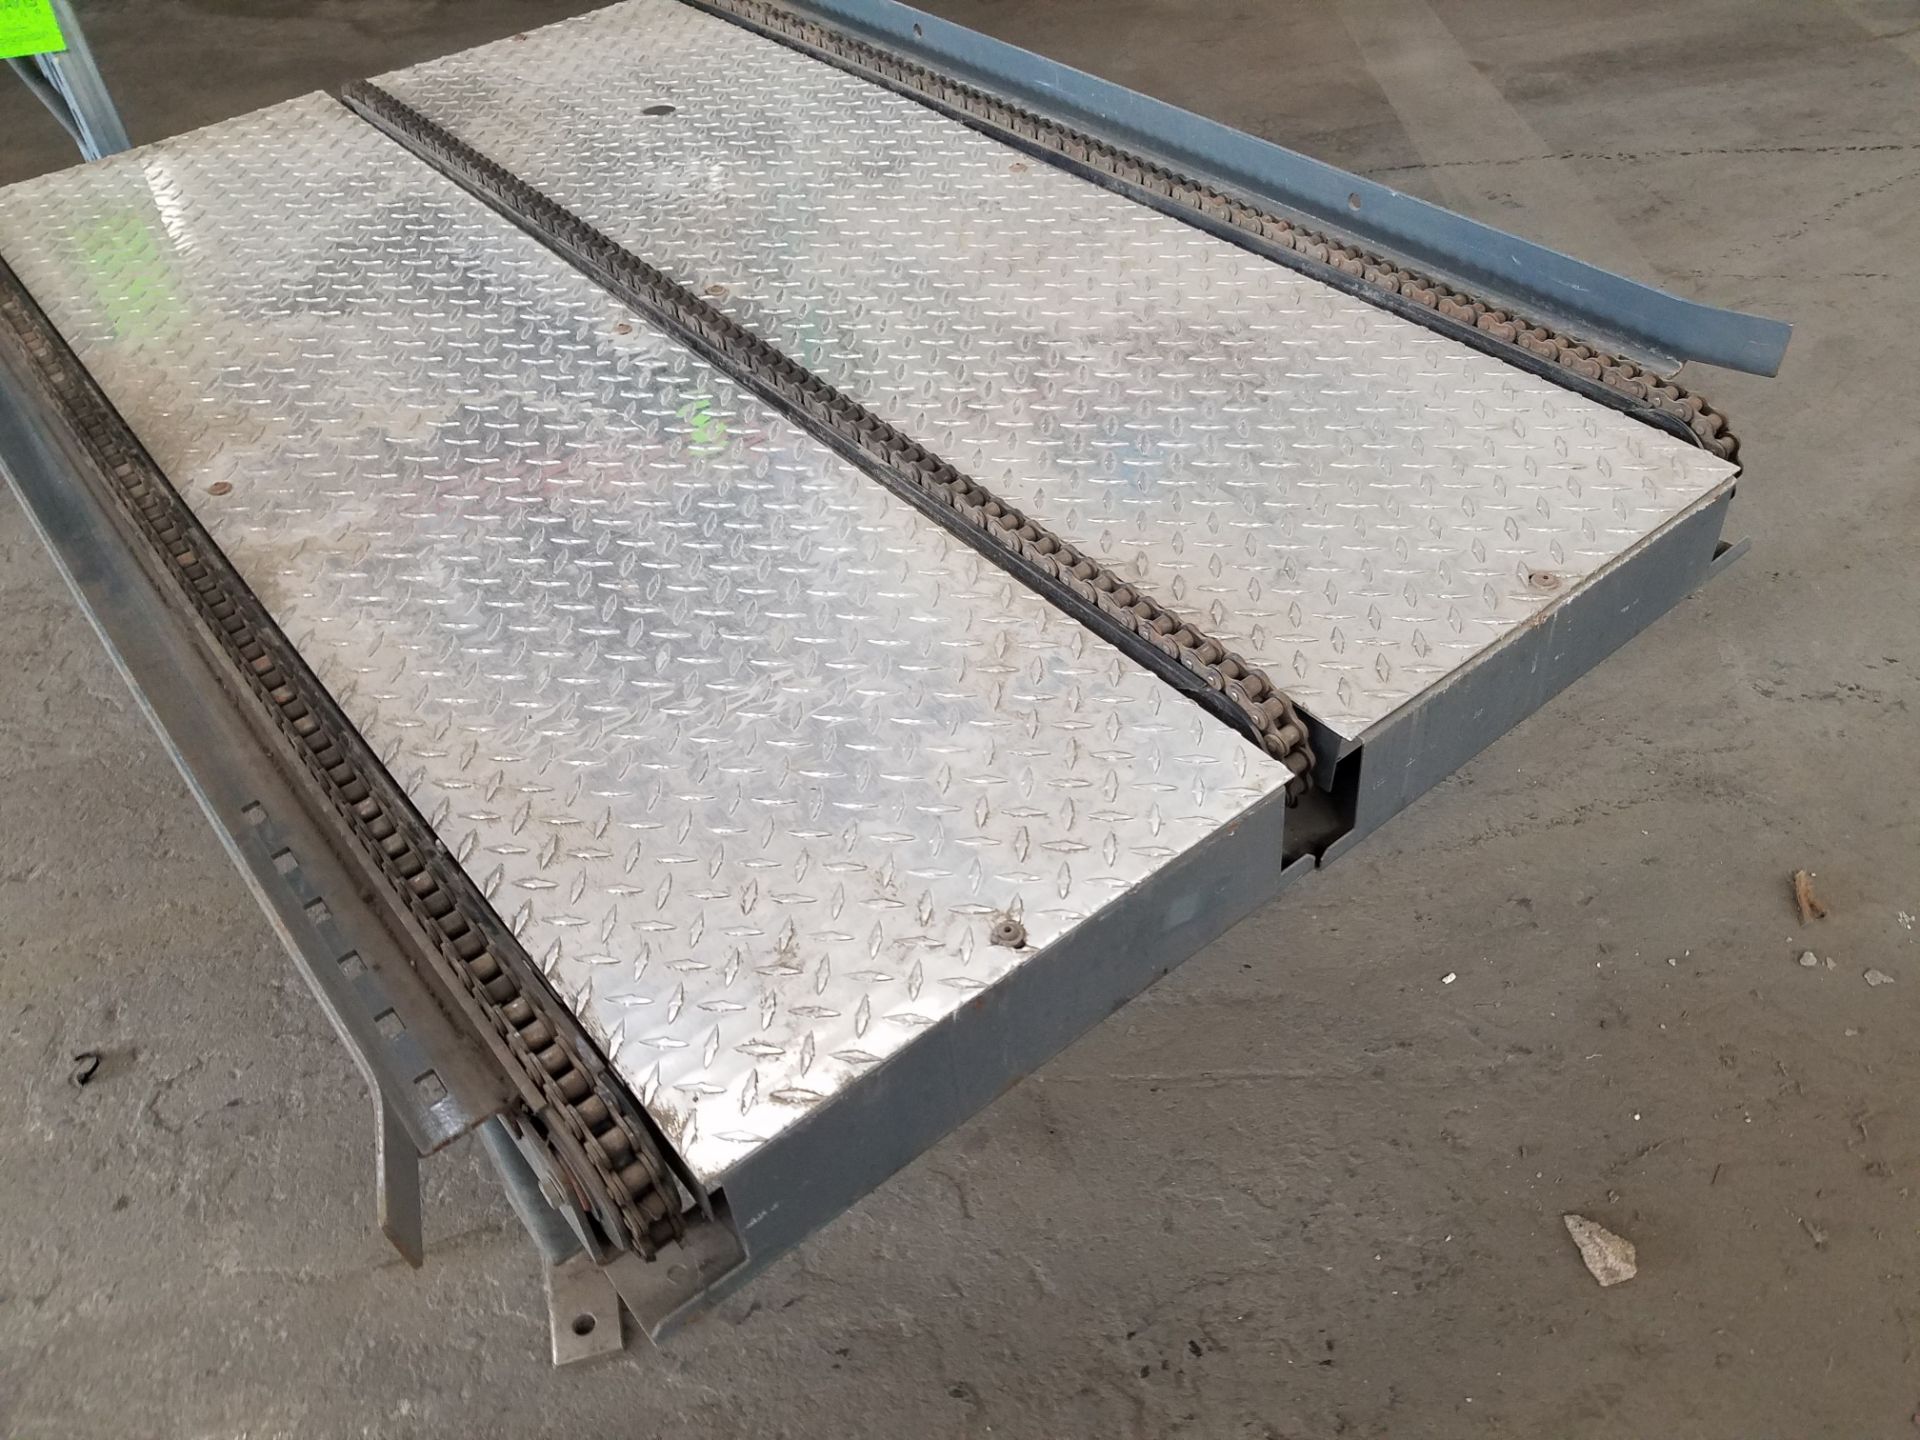 Chain Drive Pallet Conveyor - Aprox. 41" W x 60" Long x 18" H (Rigging, Loading & Site Management - Image 2 of 4